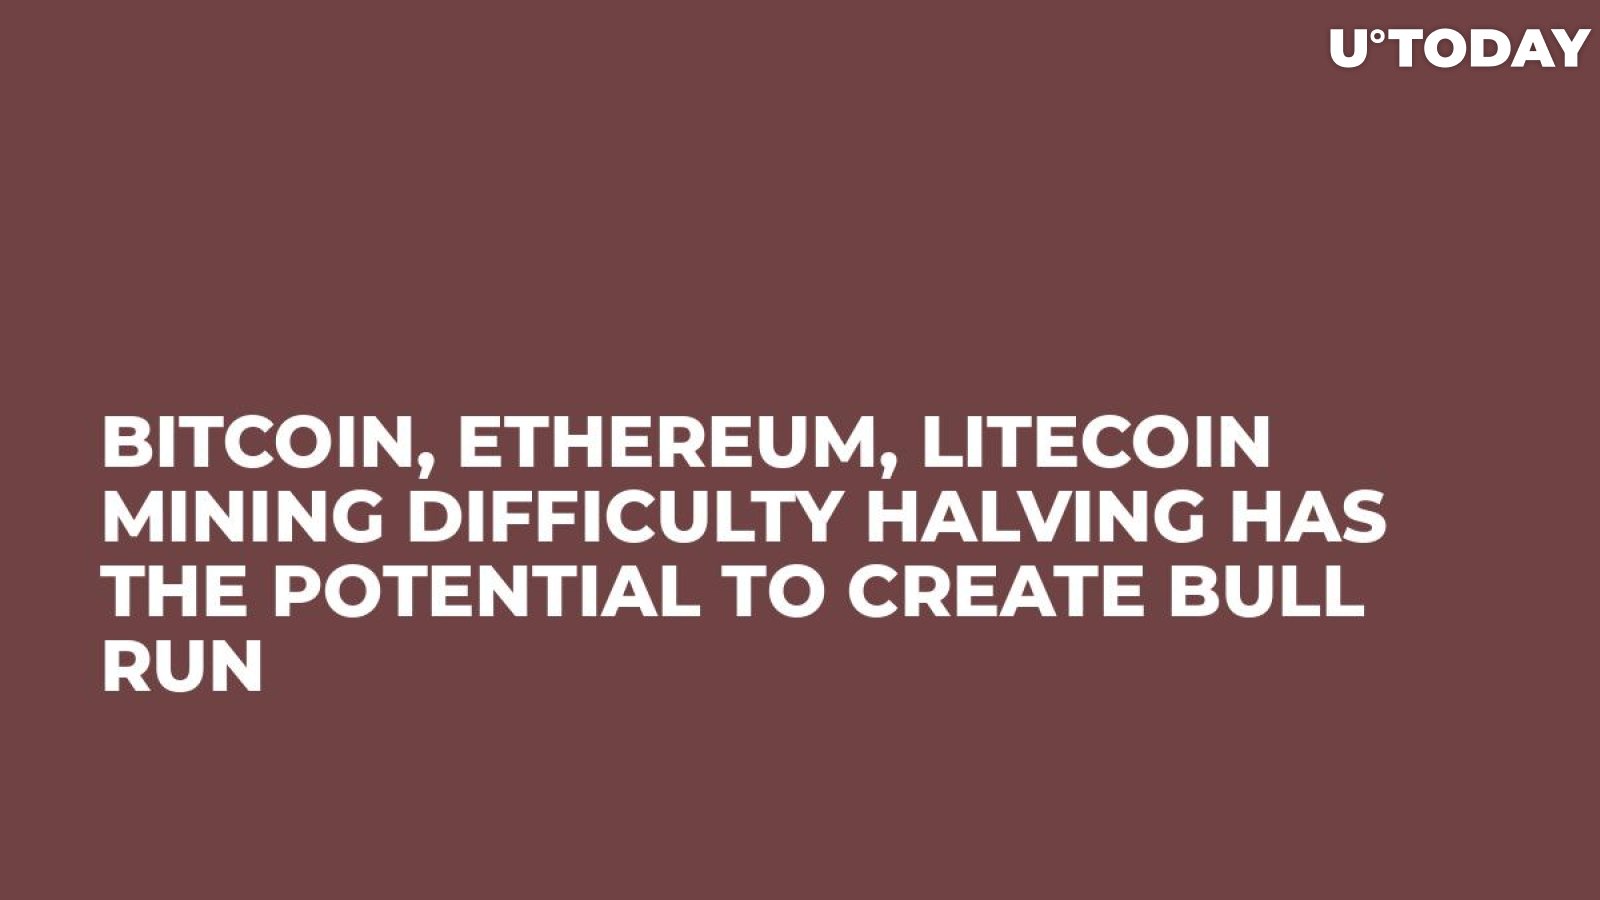 Bitcoin, Ethereum, Litecoin Mining Difficulty Halving Has the Potential to Create Bull Run